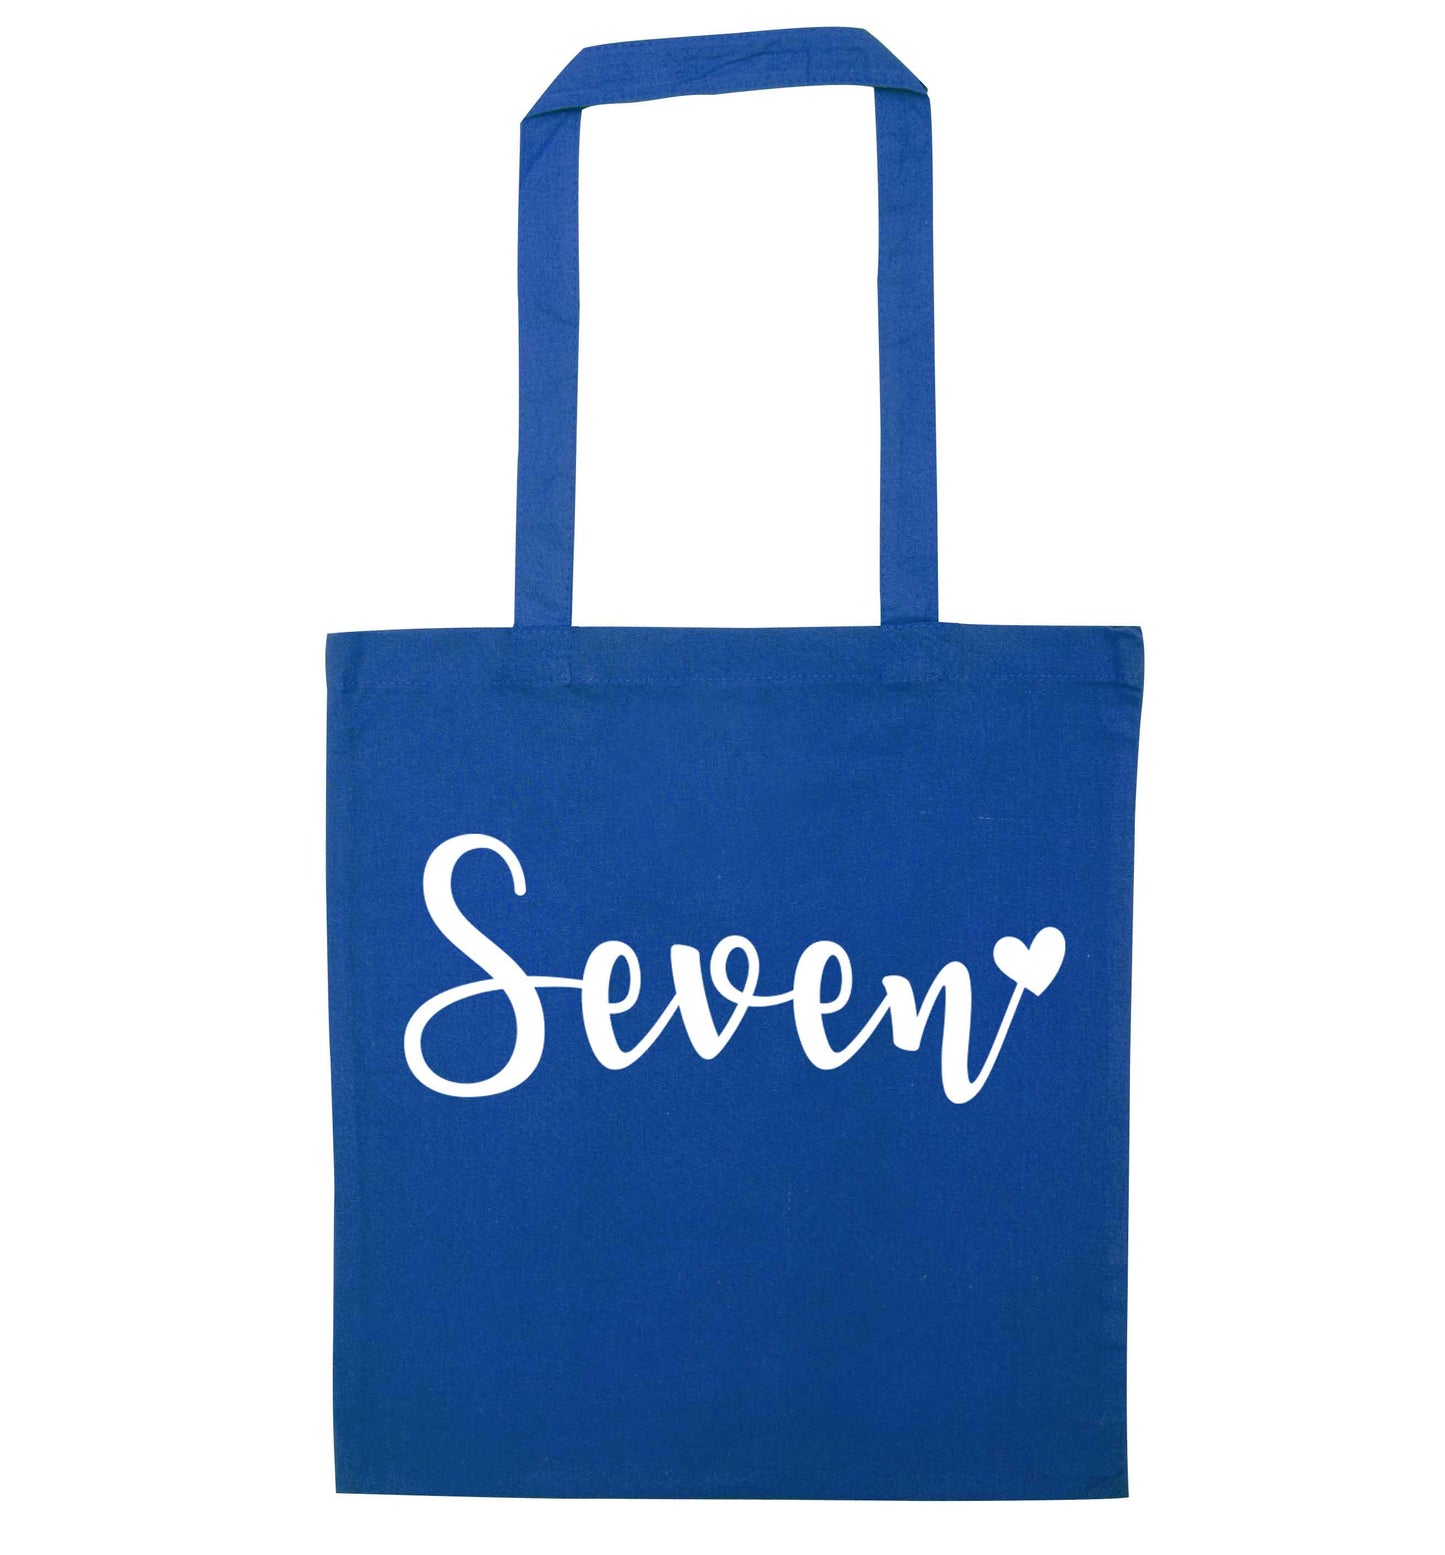 Seven and heart blue tote bag